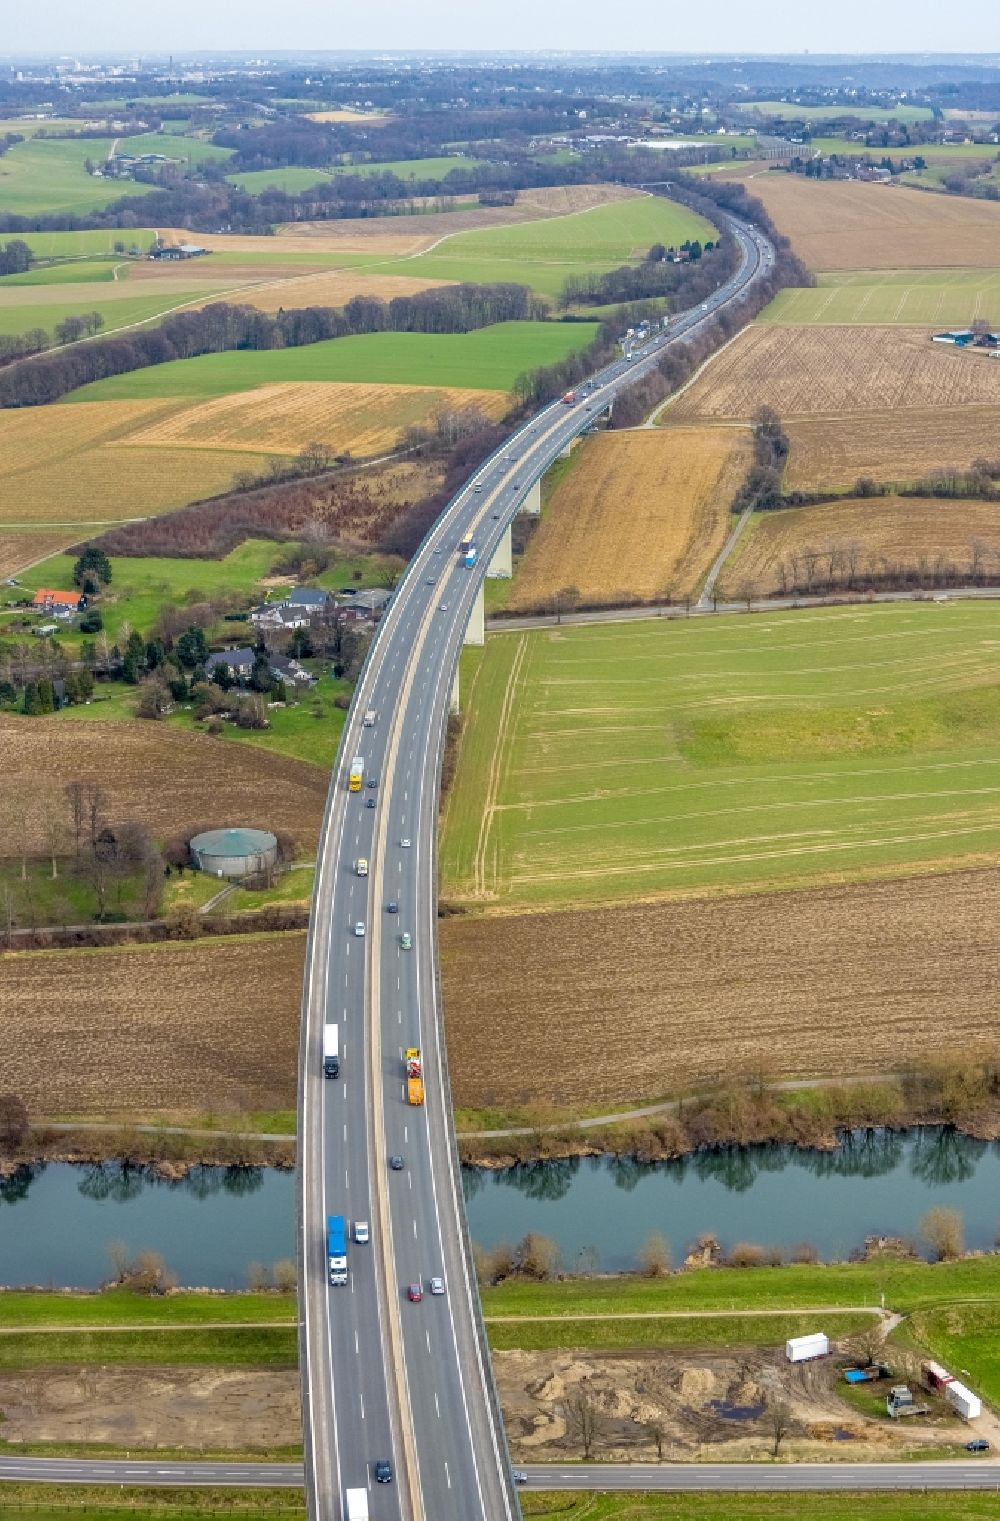 Aerial image Mintard - Routing and traffic lanes over the highway bridge in the motorway A 52 over the shore of river Ruhr in Muelheim on the Ruhr in the state North Rhine-Westphalia, Germany